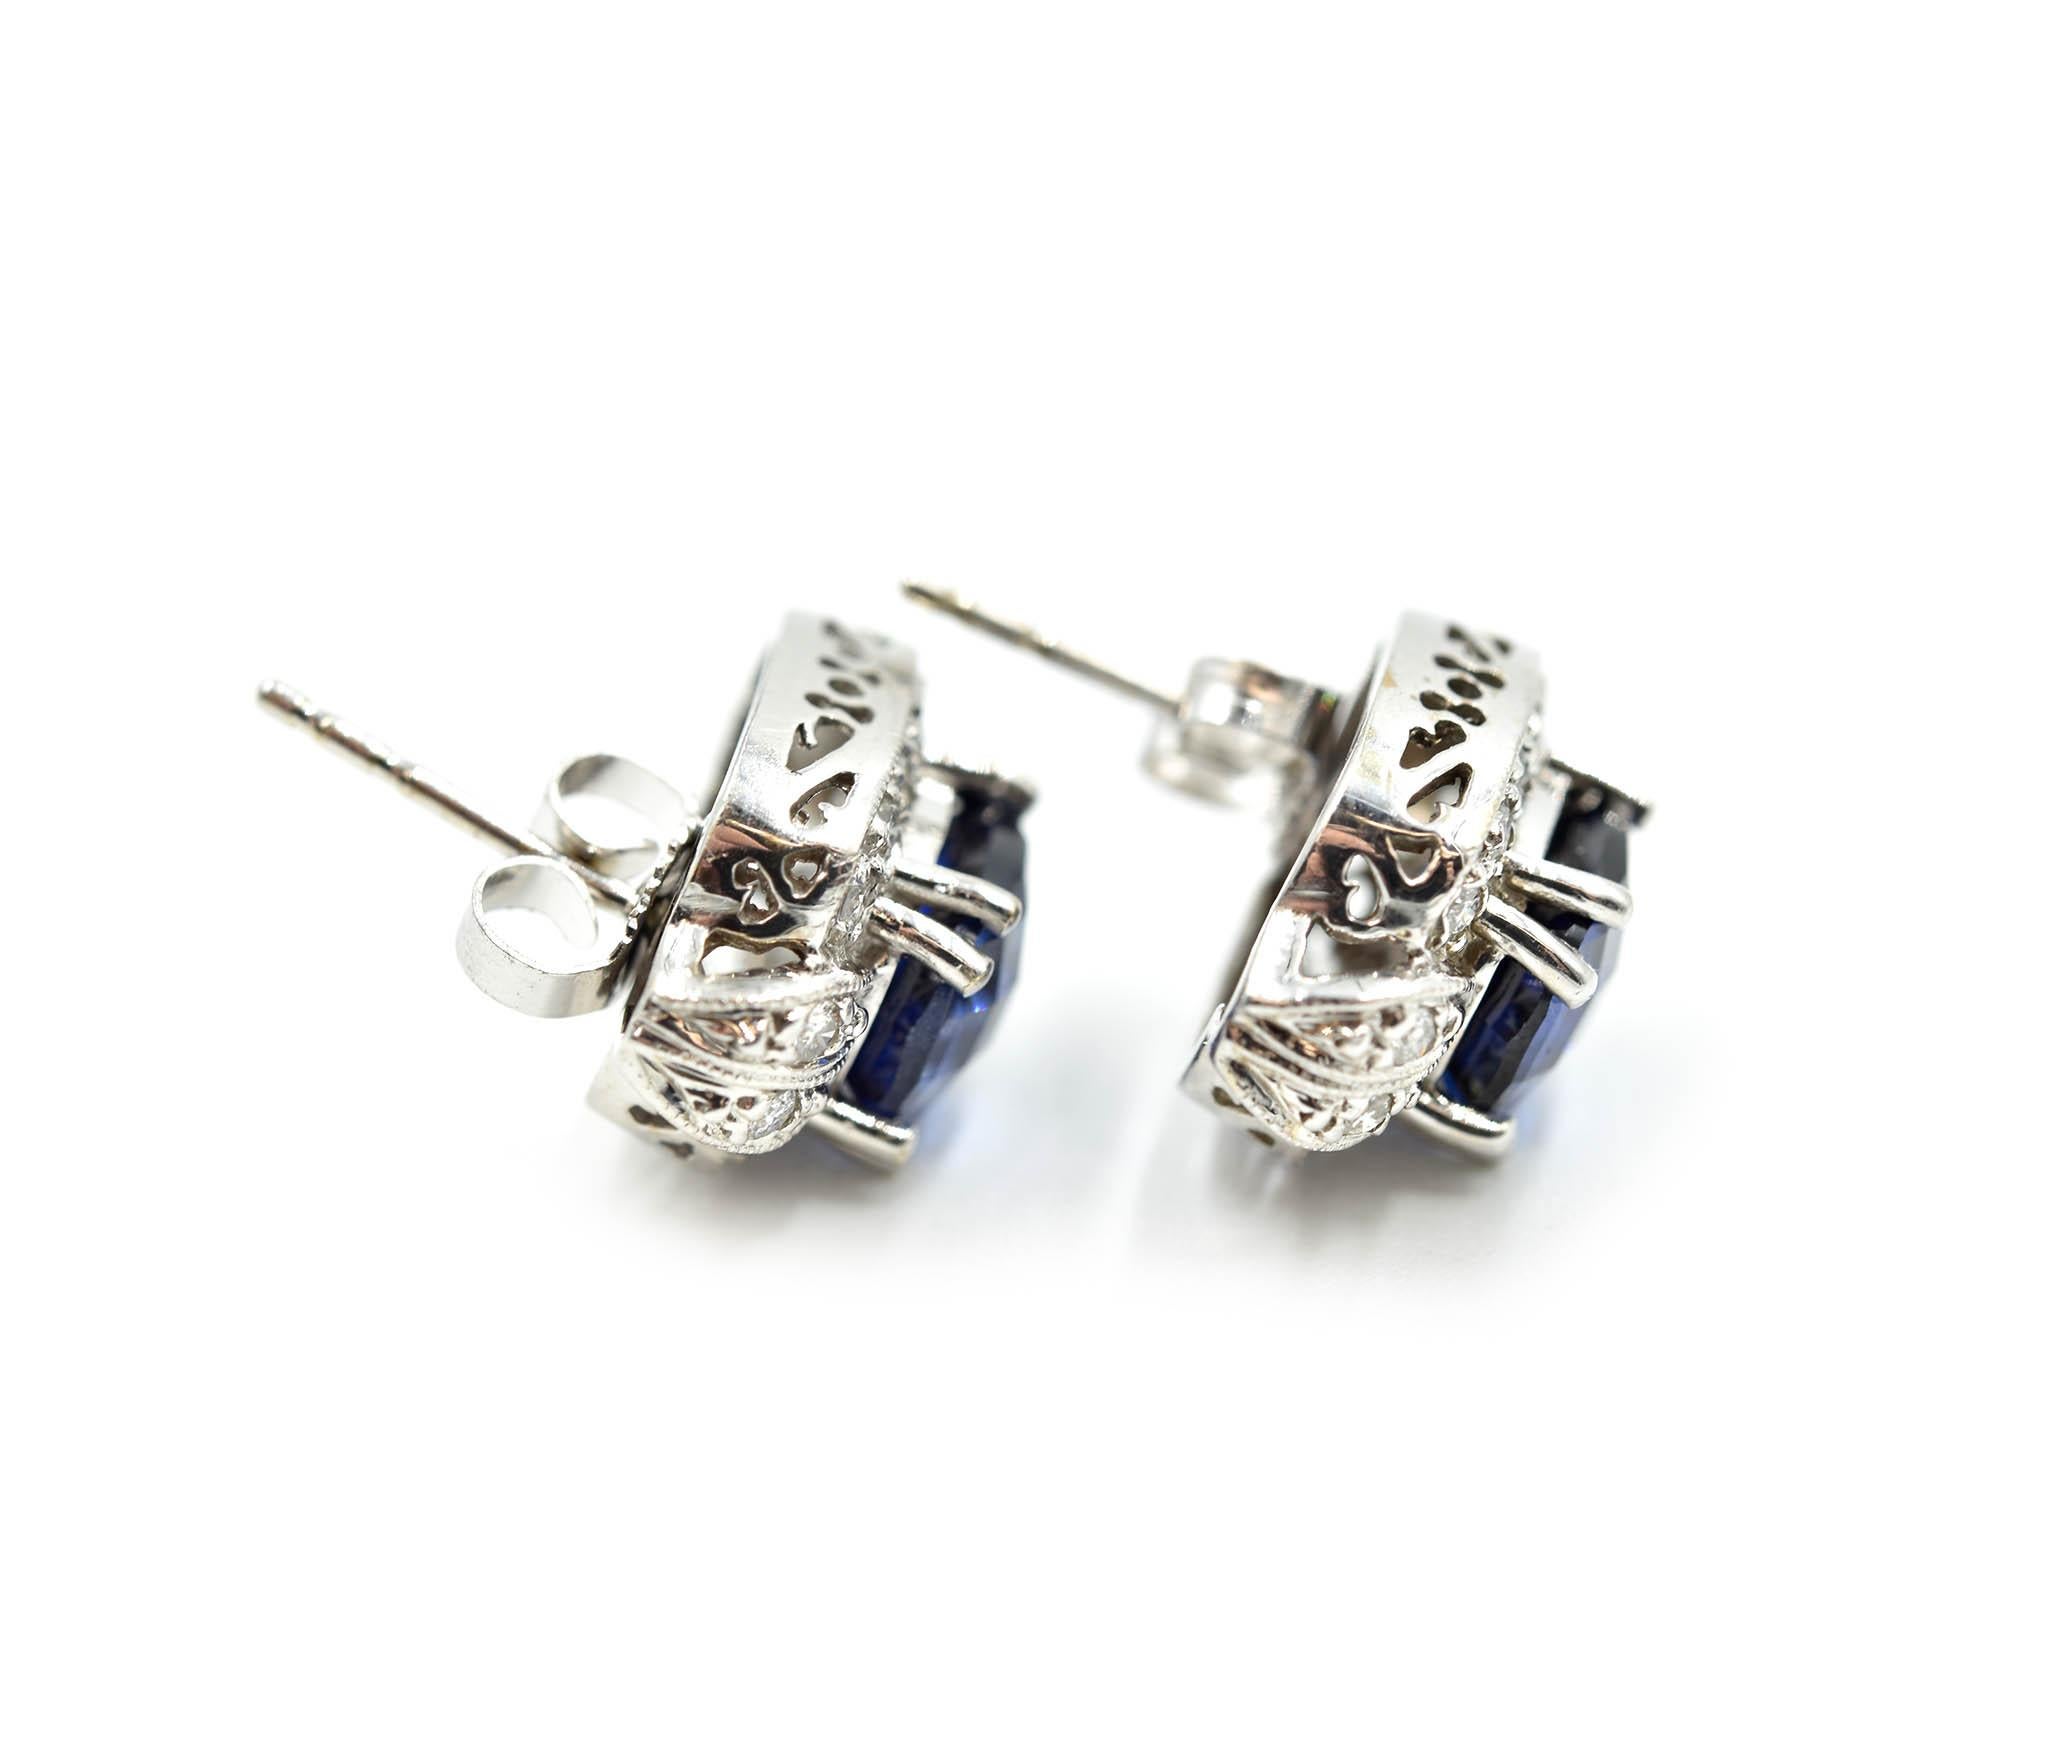 Designer: custom design
Material: 14k white gold
Sapphires: 2 oval sapphires = 4.58 carat total weight
Diamonds: 32 round brilliants = 0.32 carat total weight
Dimensions: earrings measure 15.58mm x 10.05mm
Fastenings: friction backs 
Weight: 4.86